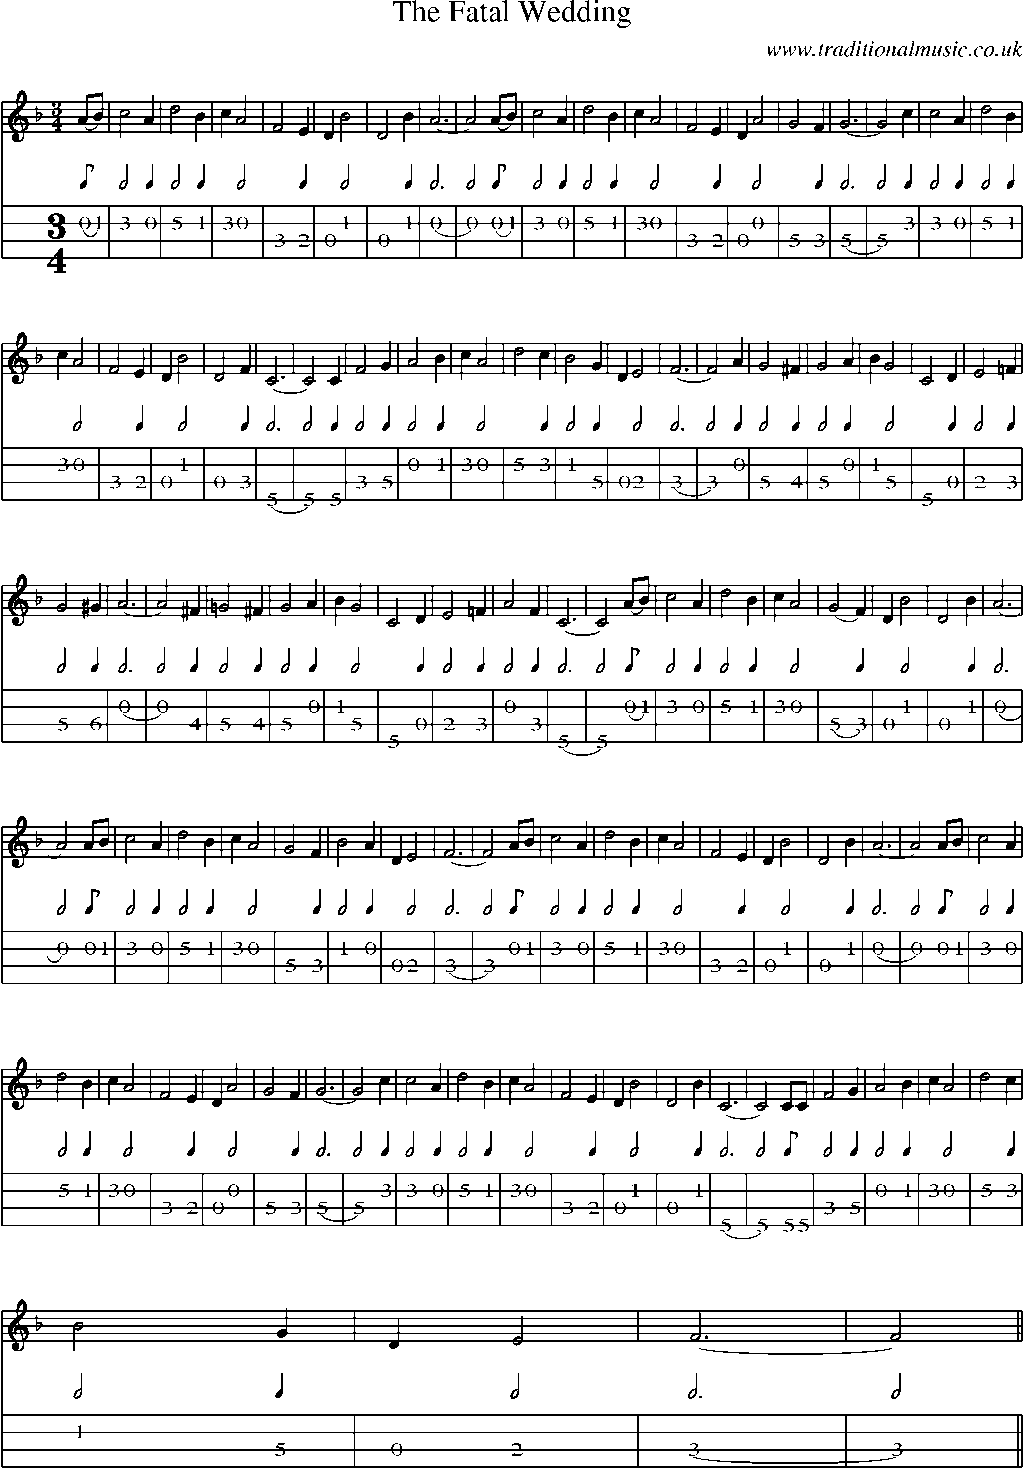 Mandolin Tab and Sheet Music for The Fatal Wedding